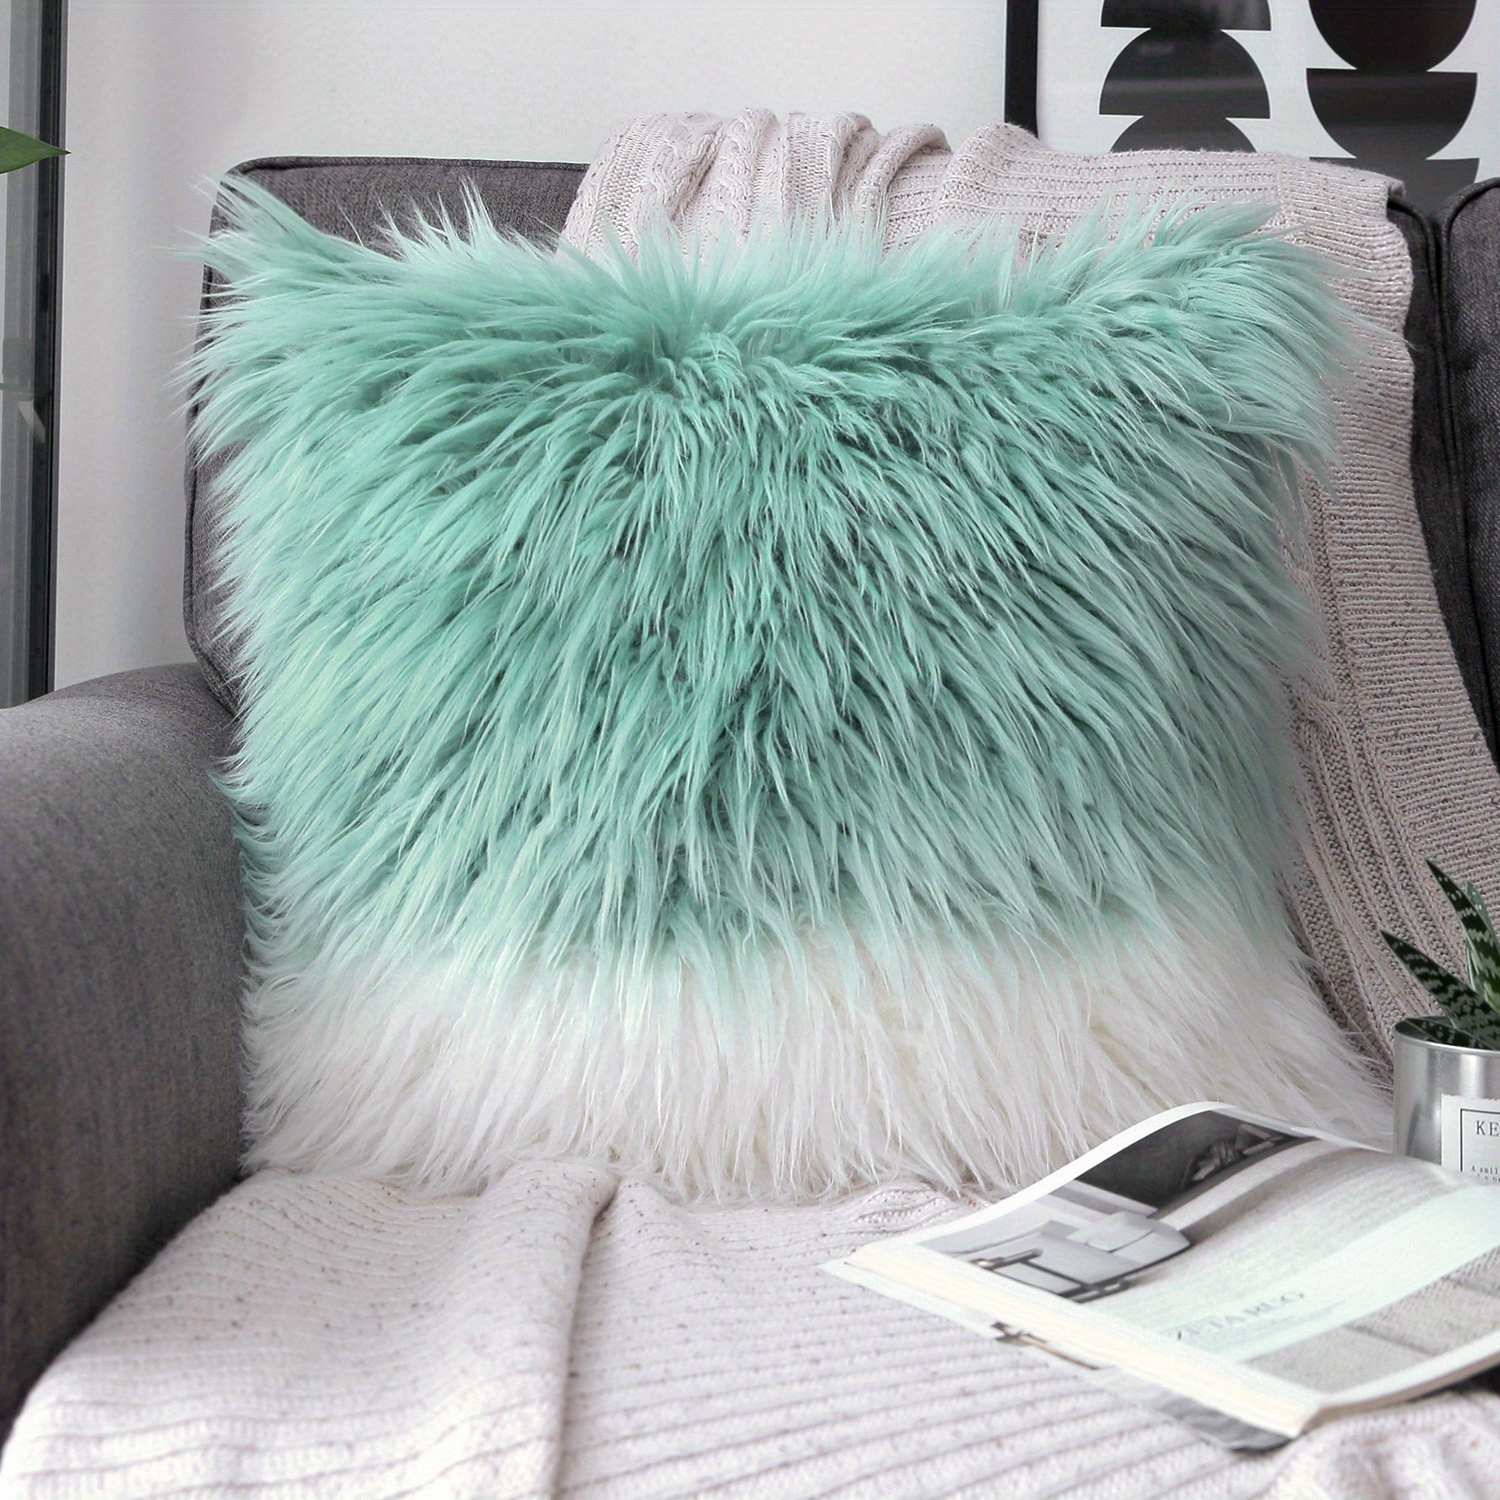 Phantoscope Faux Fur Solid Decorative Pillow Cover Fluffy Throw Pillow  Mongolian Luxury Fuzzy Pillow Case Cushion Cover for Bedroom and Couch,True